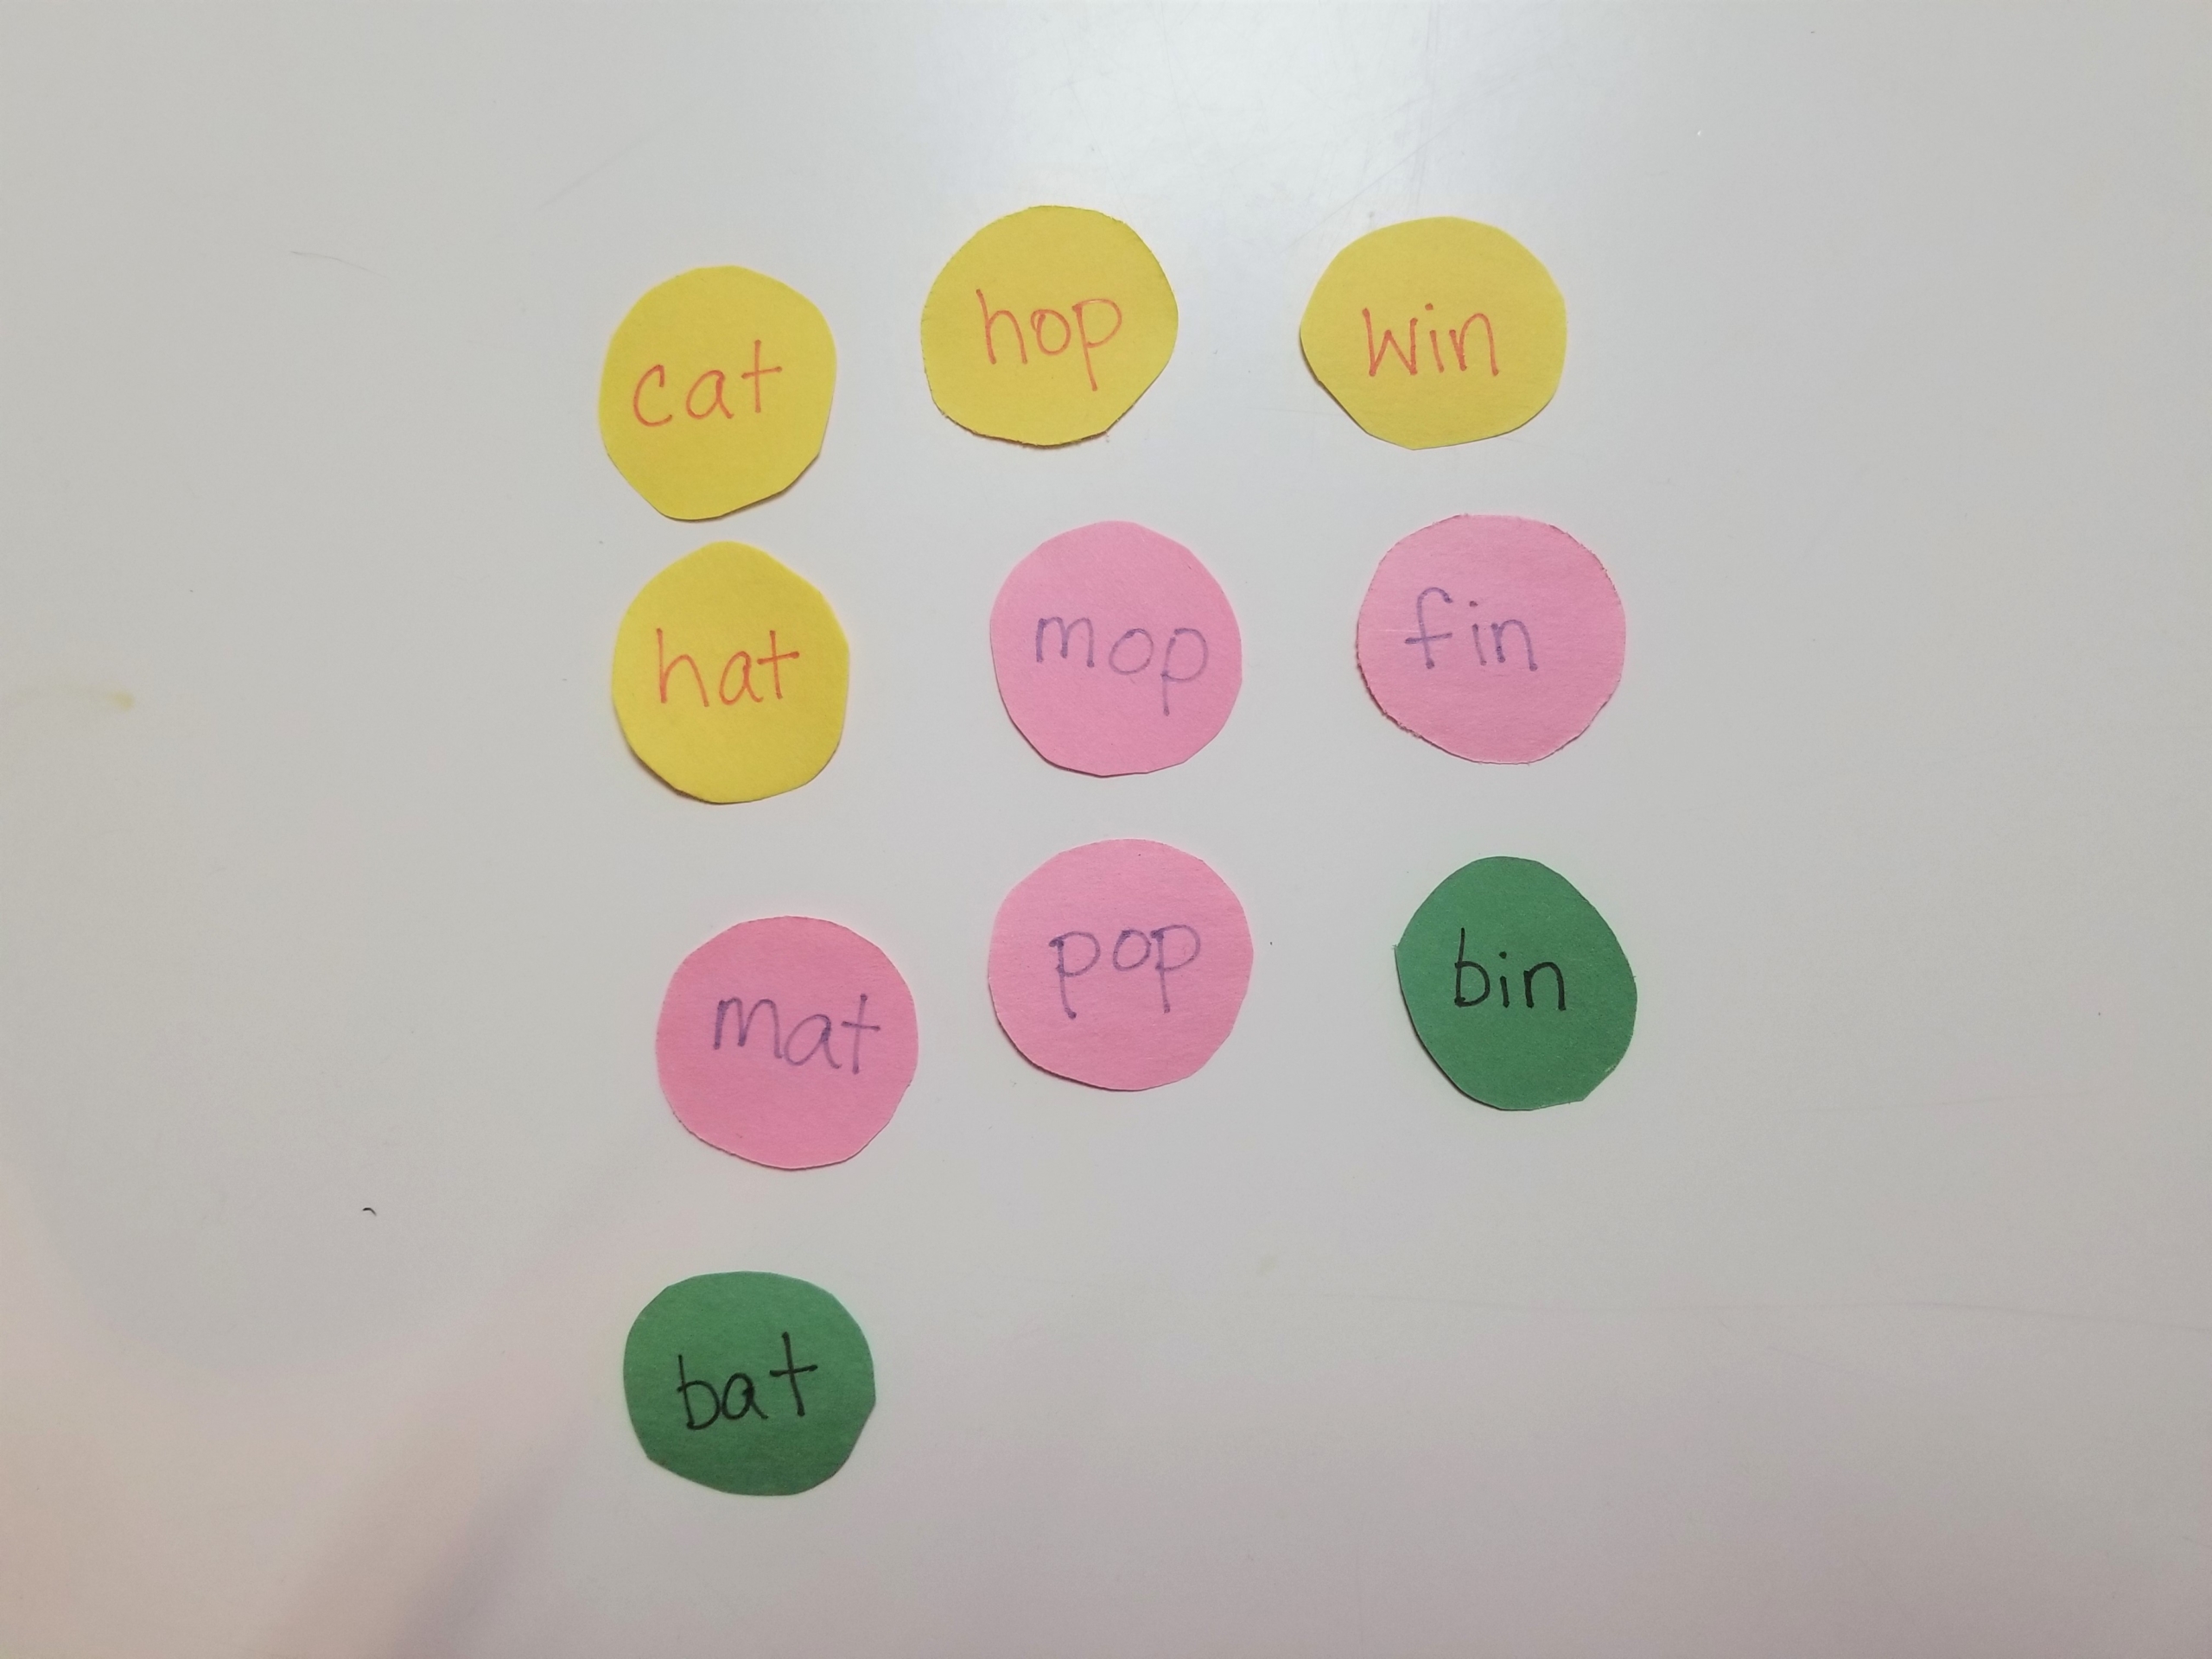 Colorful circles with word families written on them